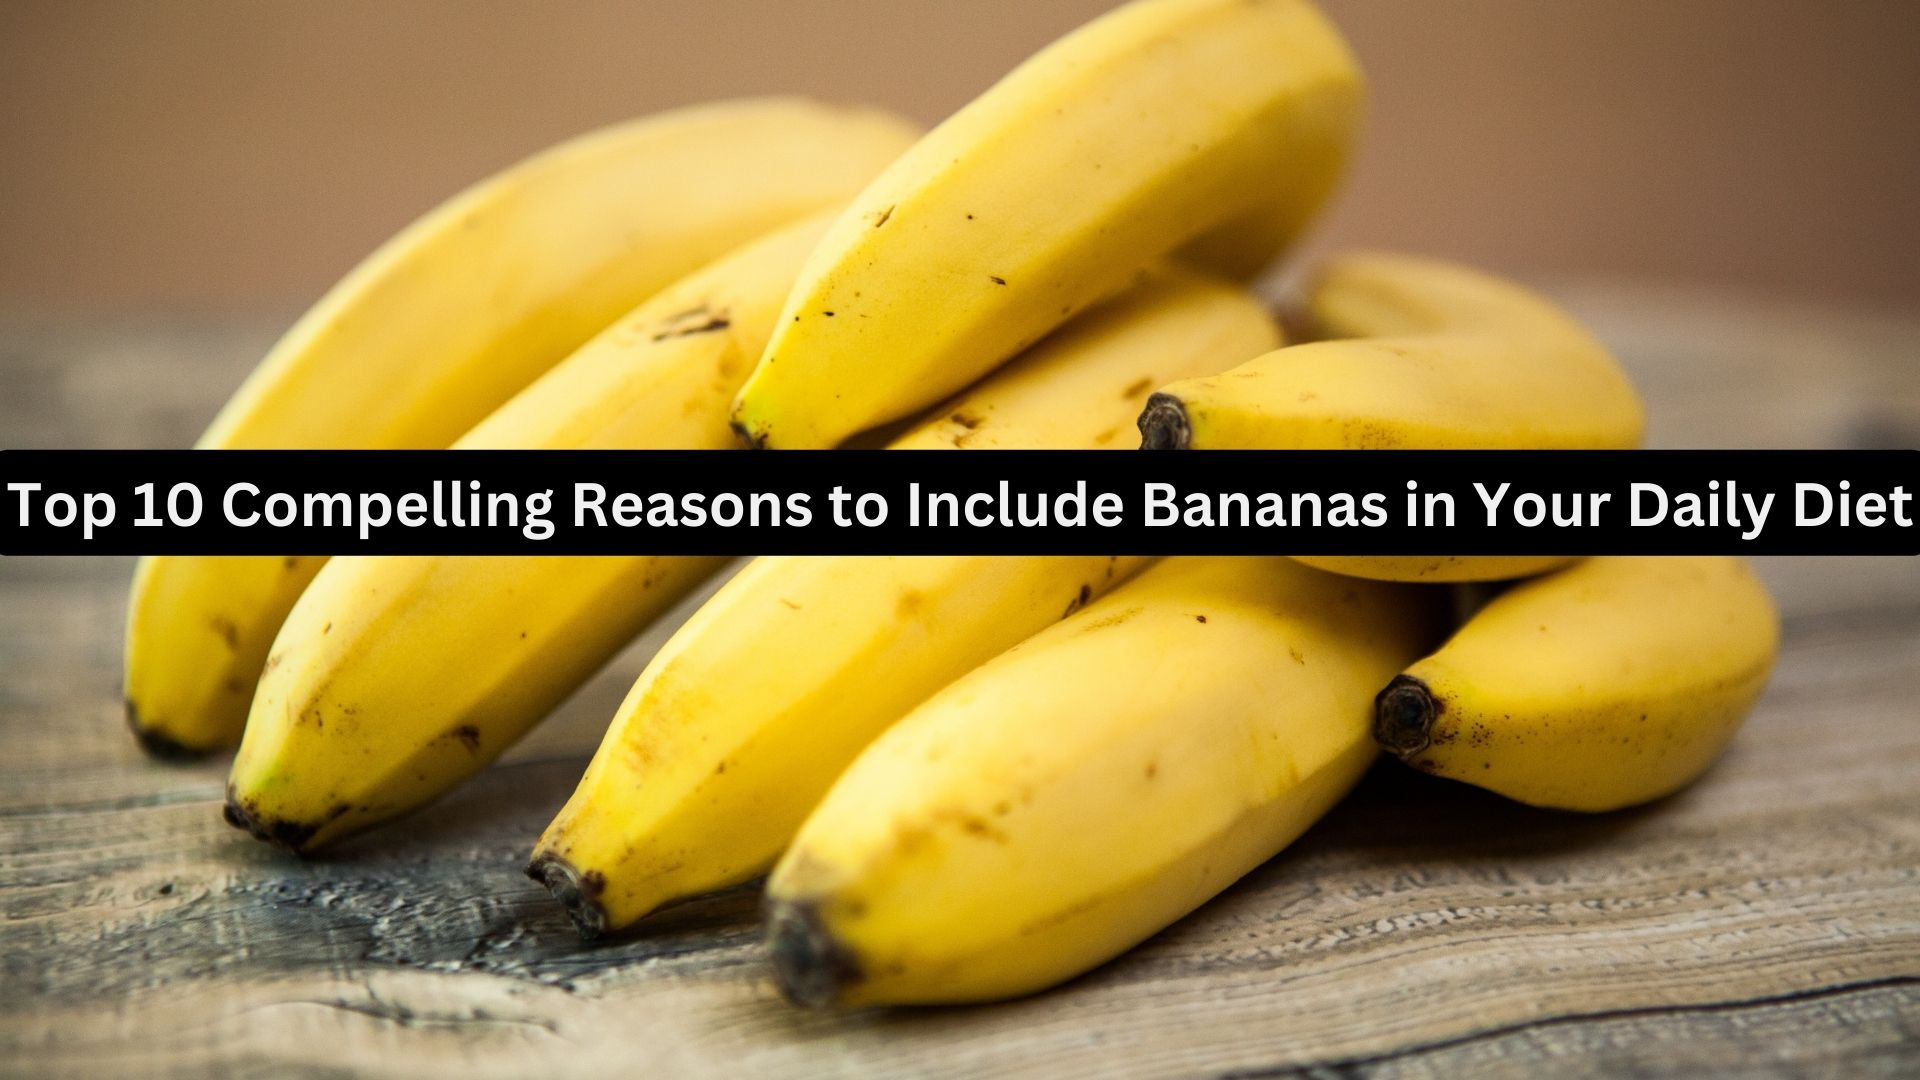 Top 10 Compelling Reasons to Include Bananas in Your Daily Diet